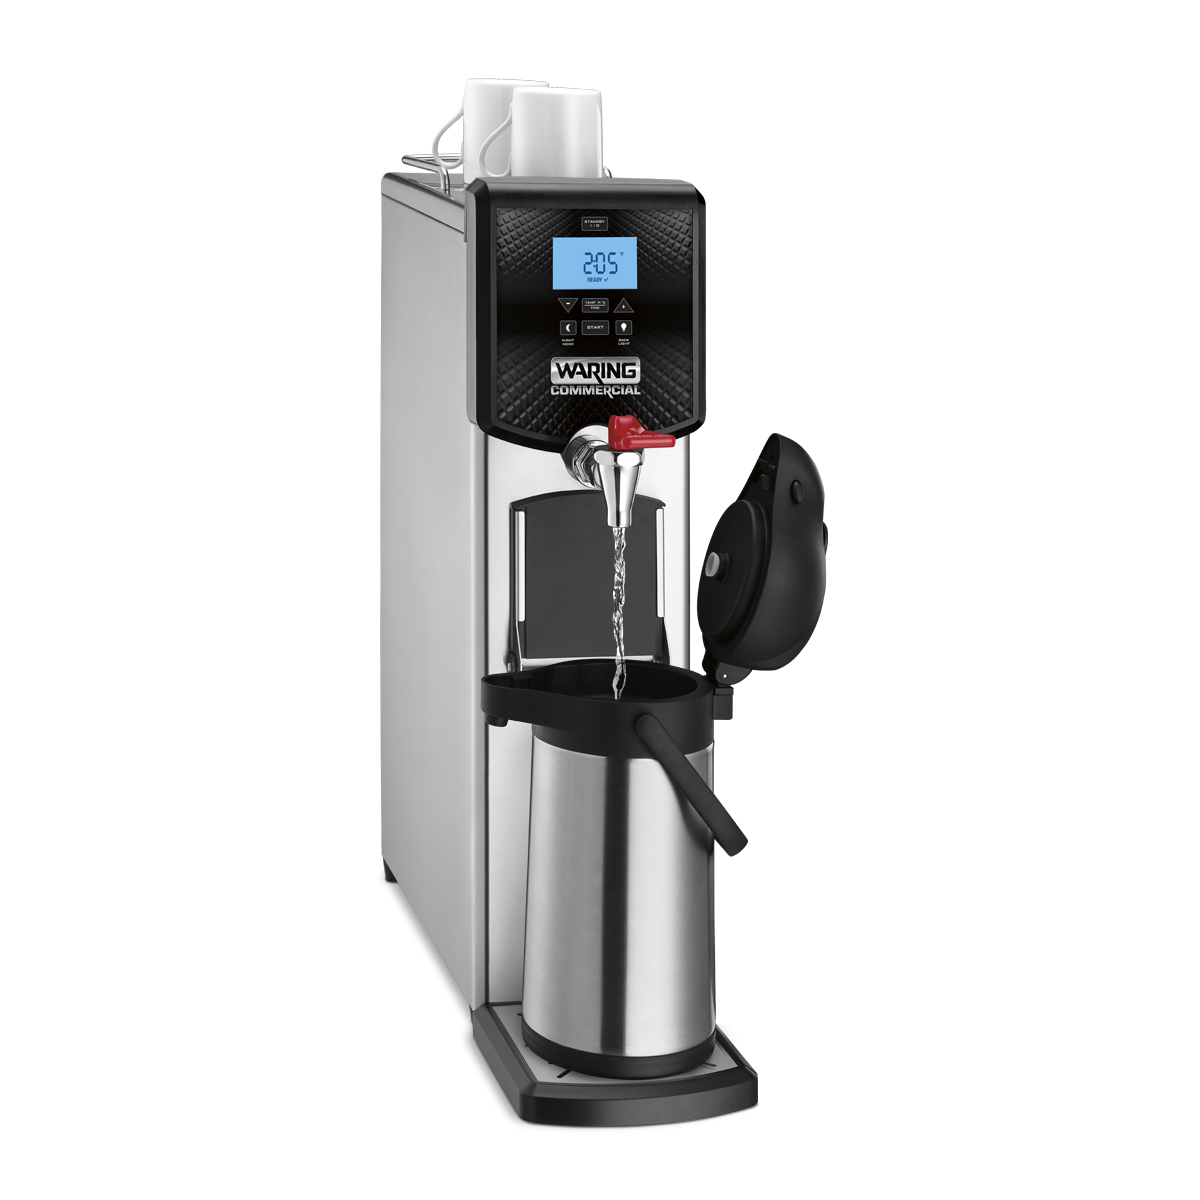 https://www.waringcommercialproducts.com/files/products/wwb5g-waring-commercial-5-gallon-water-dispenser-inset2.jpg